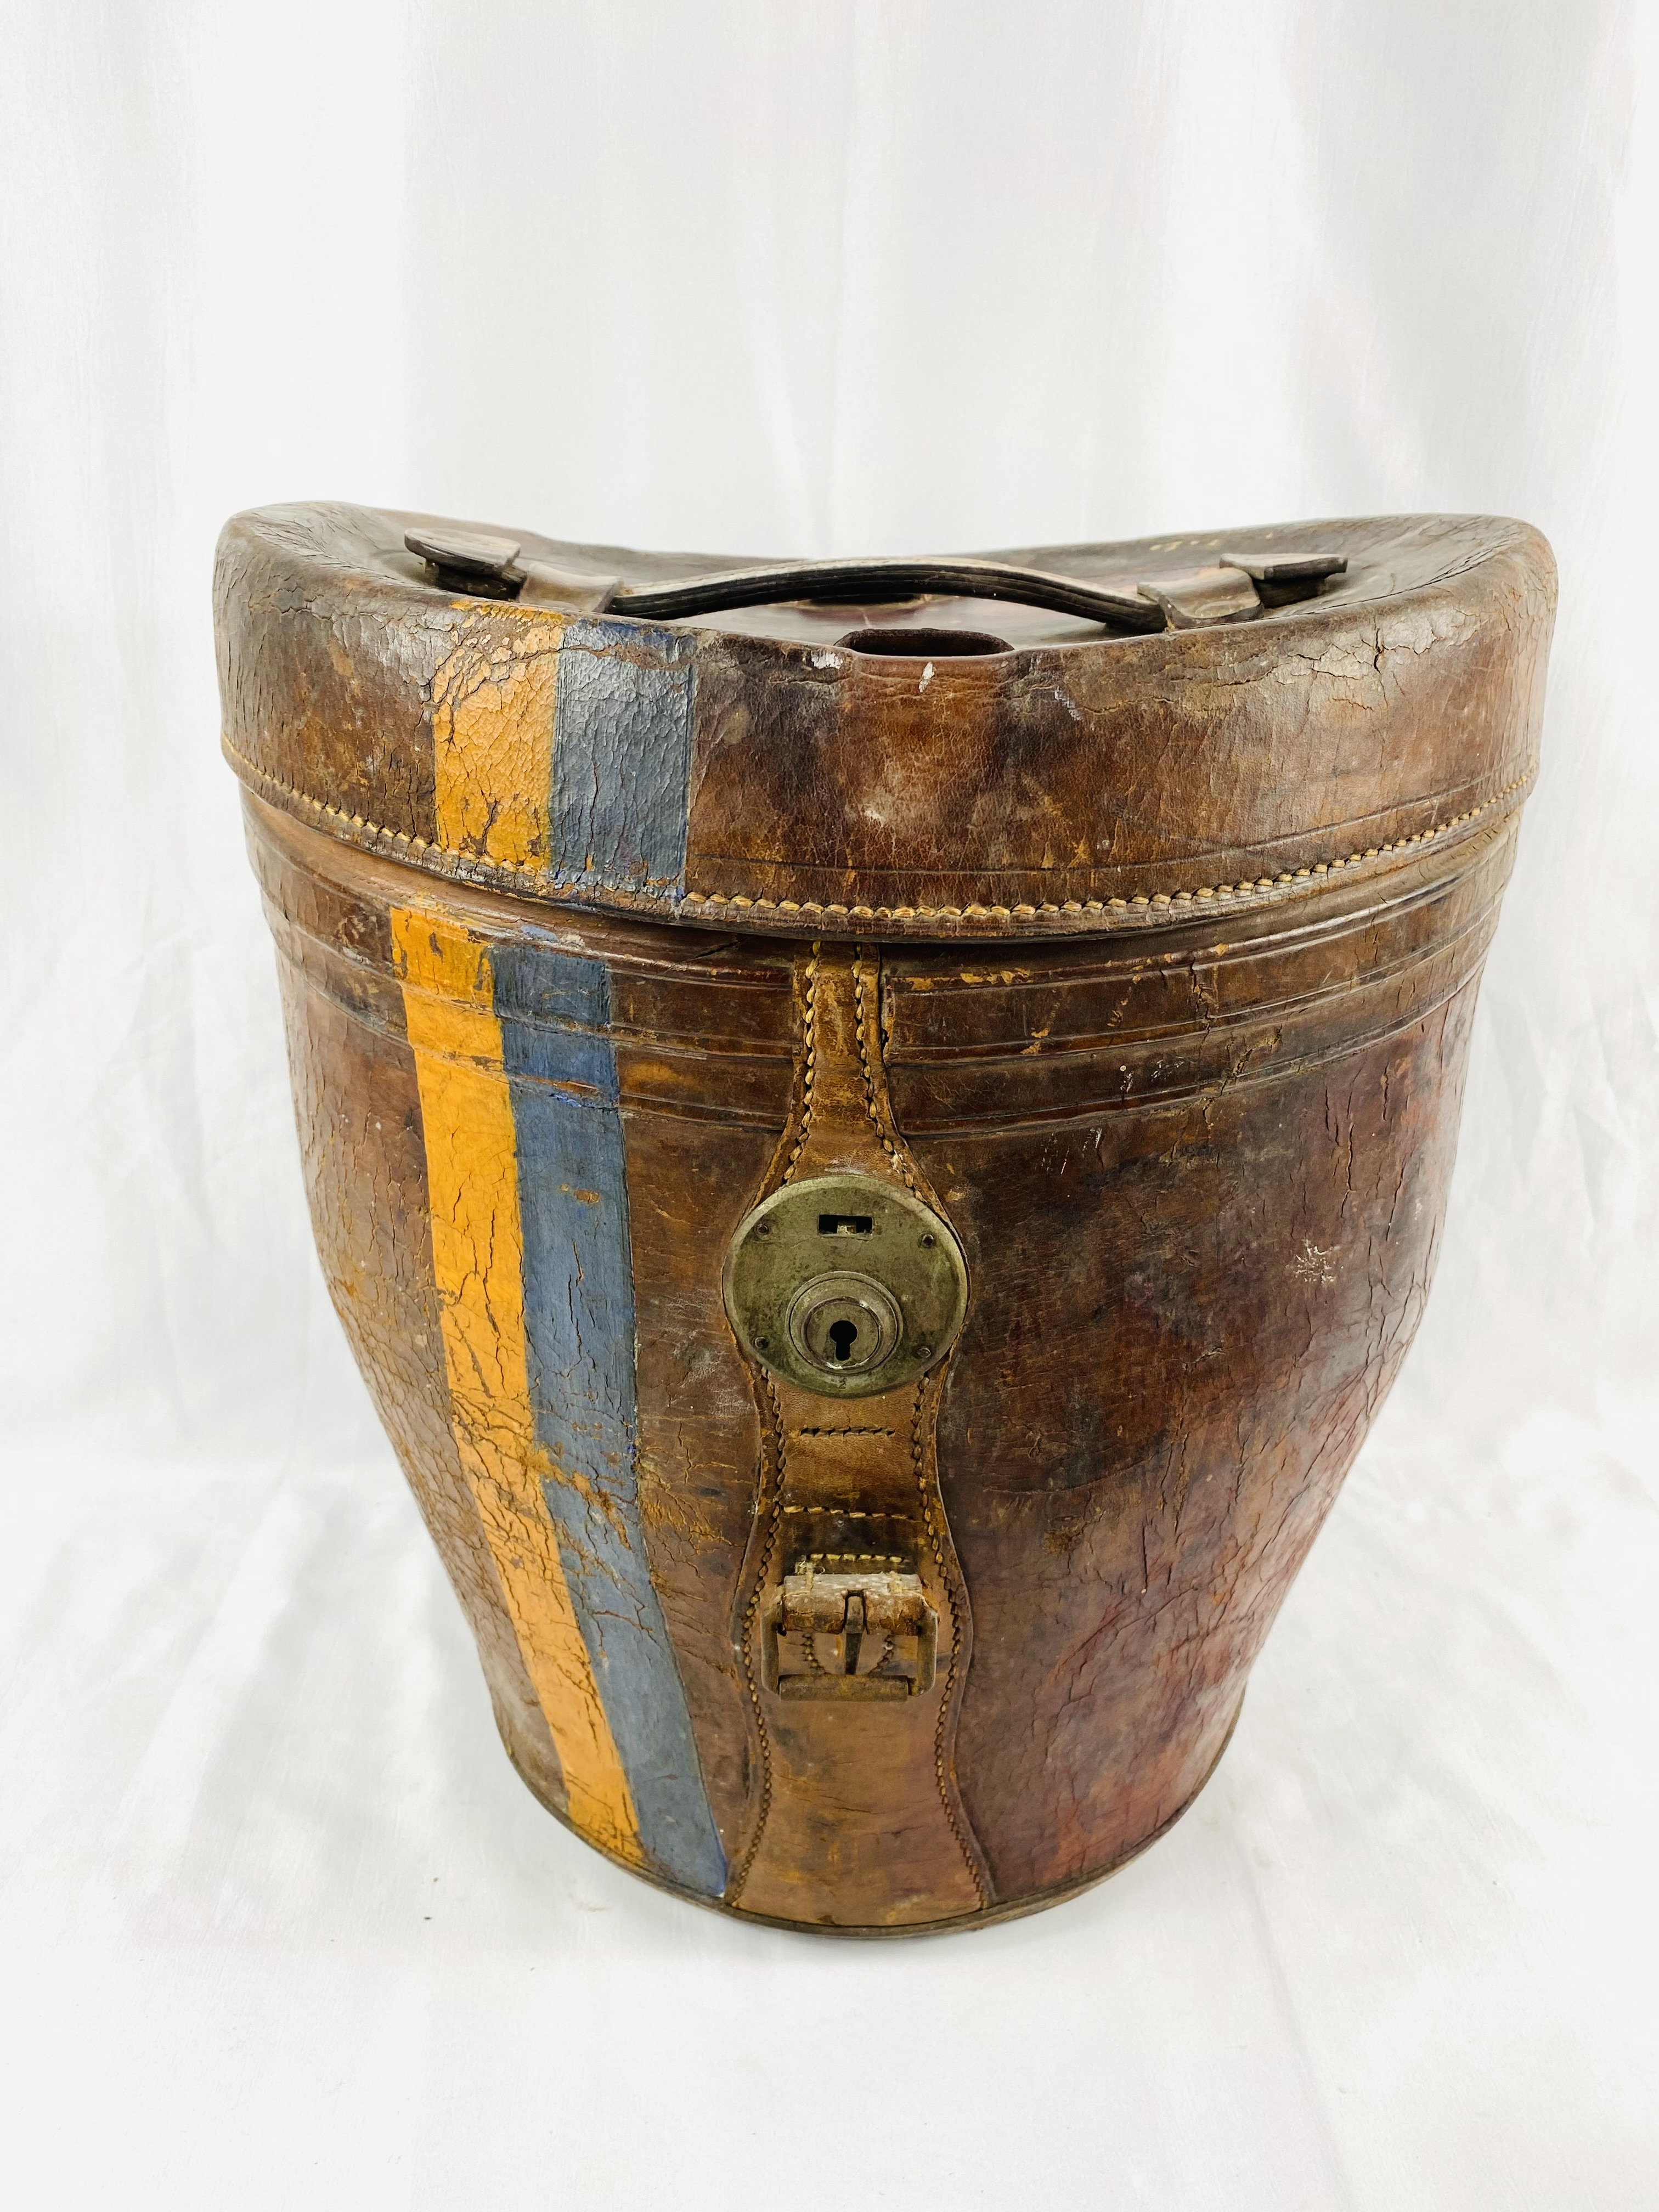 Leather double hat box with Dunn & Co silk top hat - Image 5 of 5